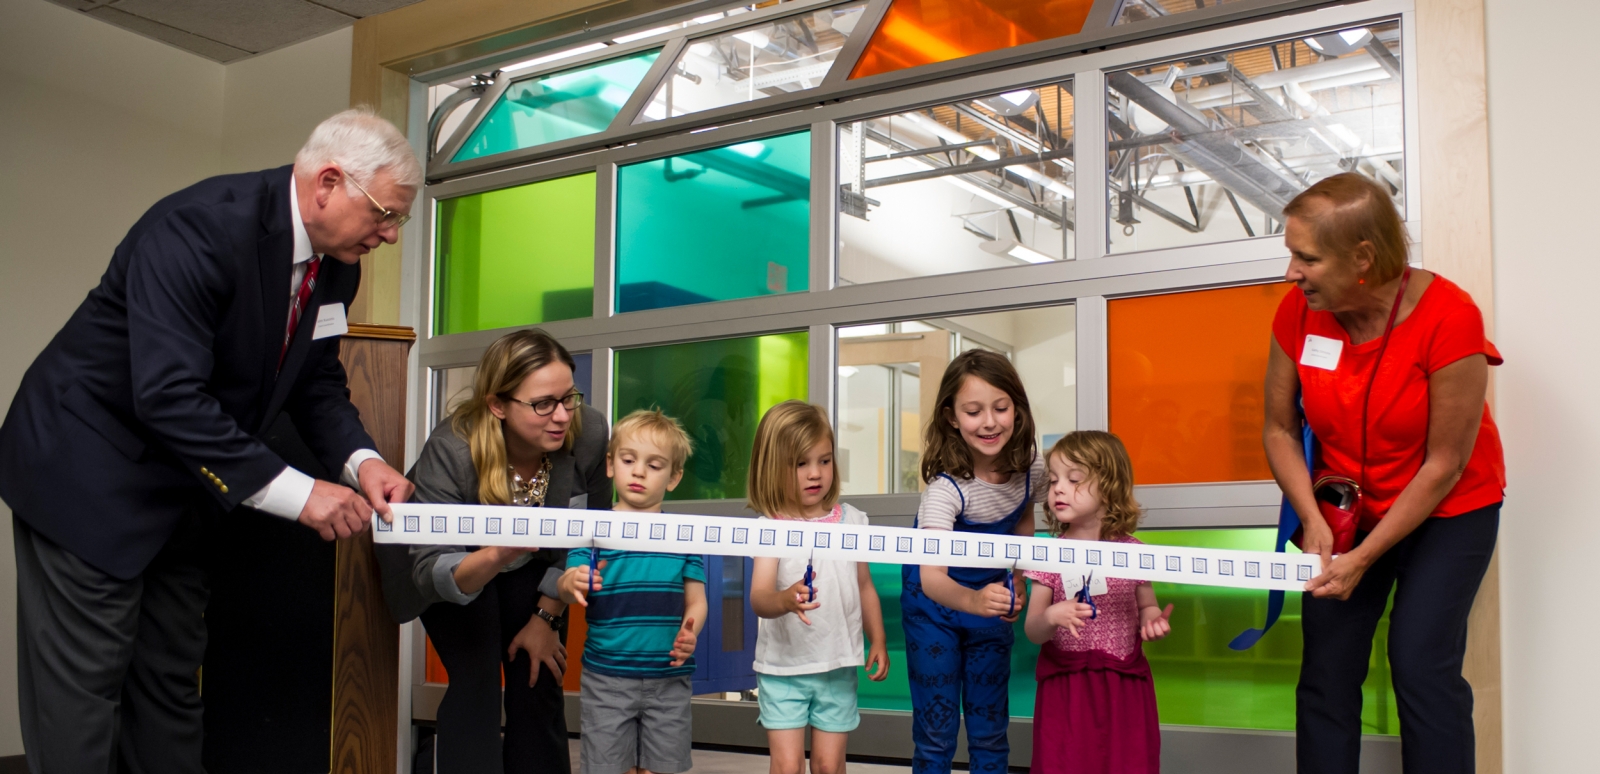 A new childcare facility opened in 2016.